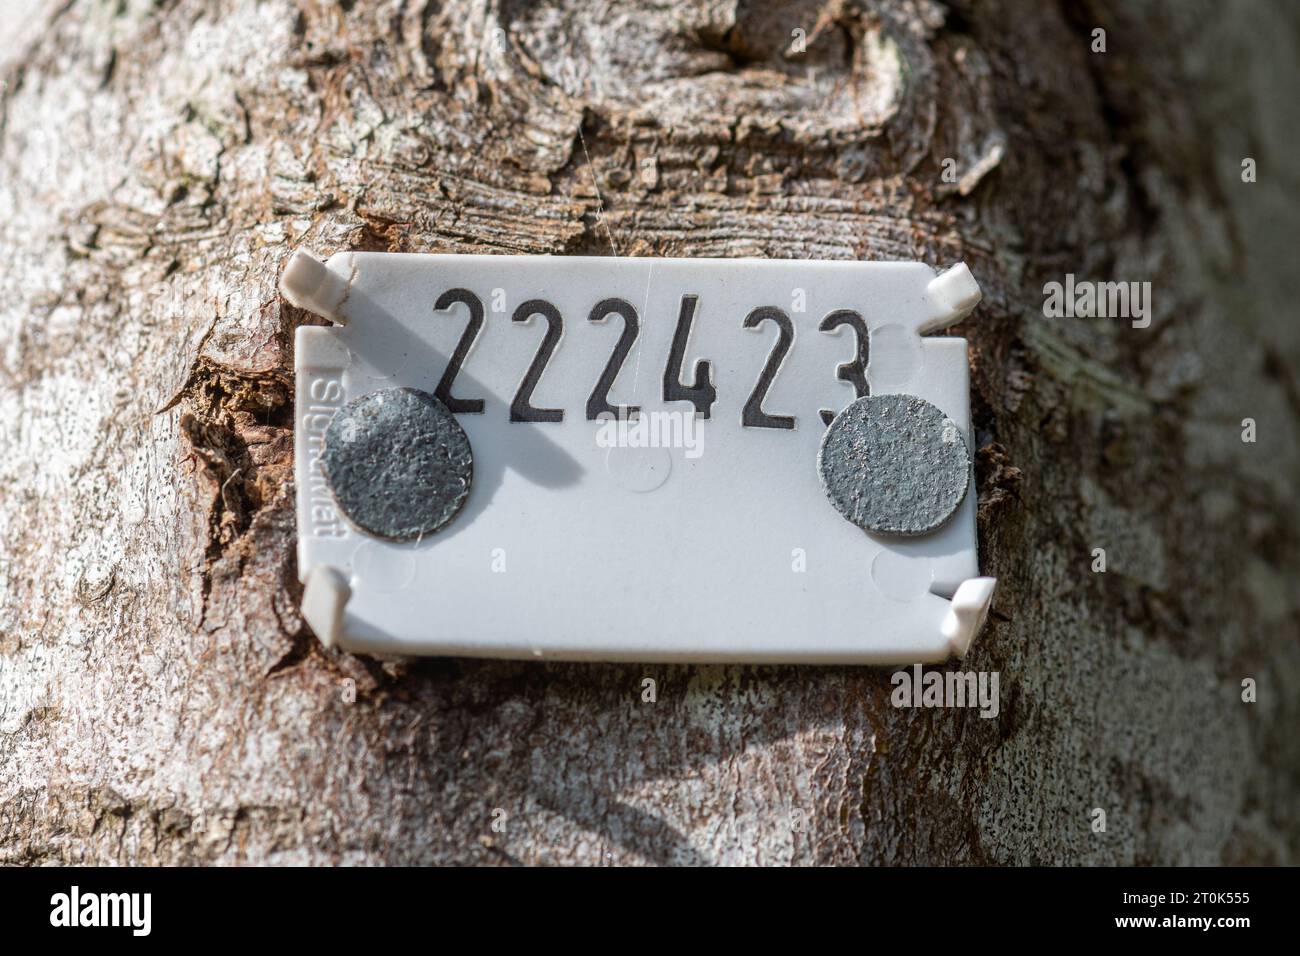 Tree tag, identification label with unique number, identifying a particular tree Stock Photo